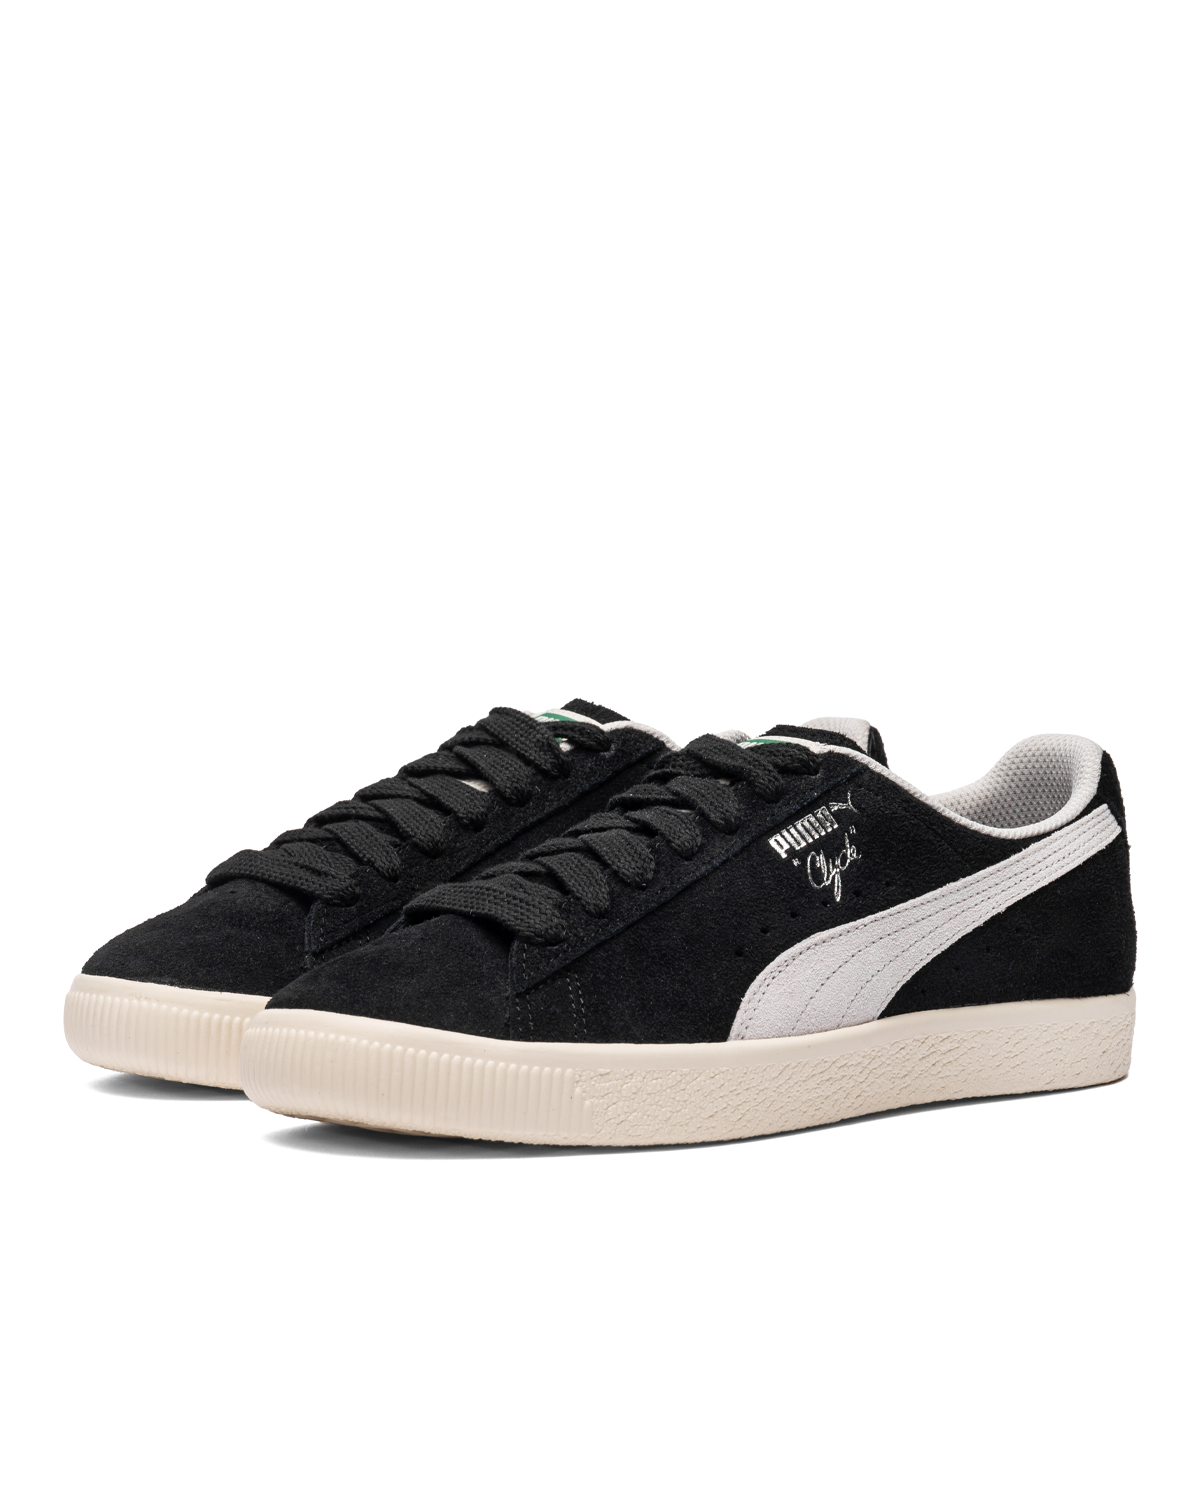 Clyde Hairy Suede Puma Black/Frosted Ivory